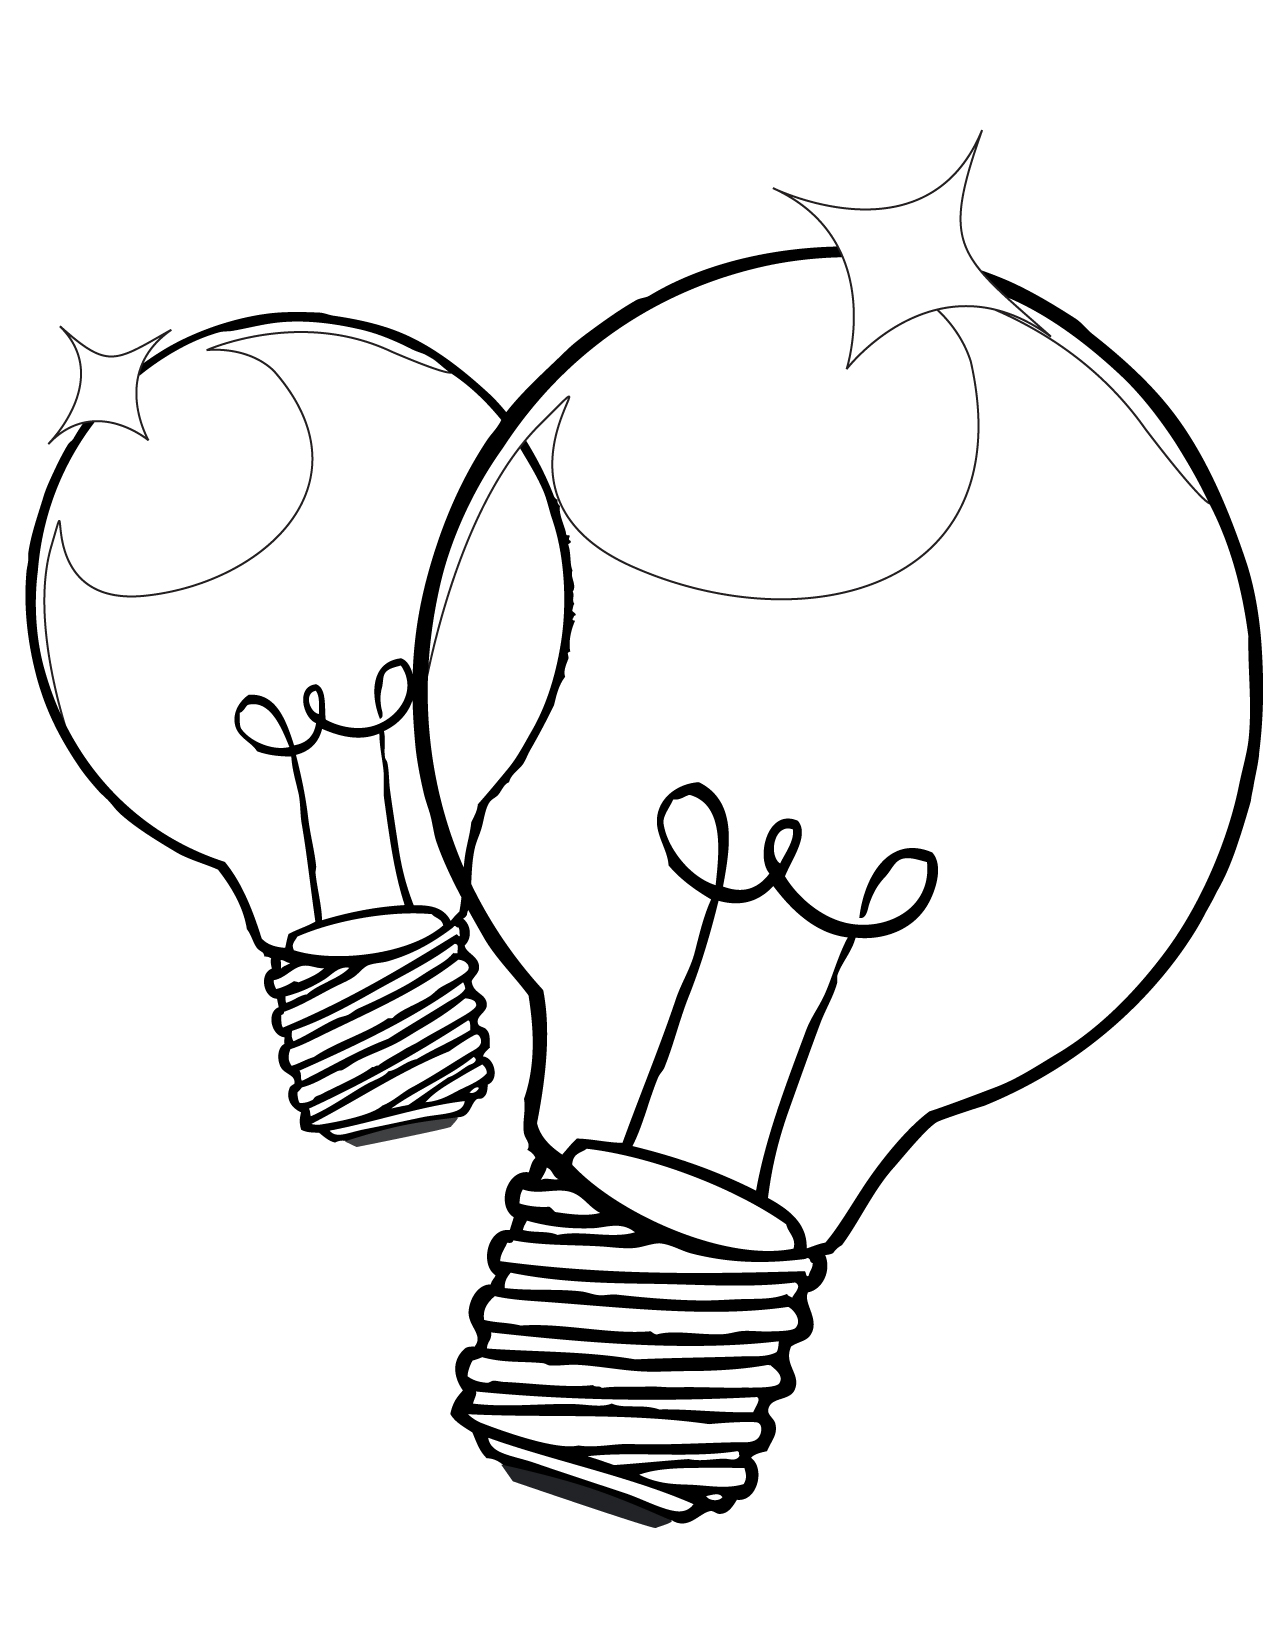 Lightbulb Coloring Page - Handipoints